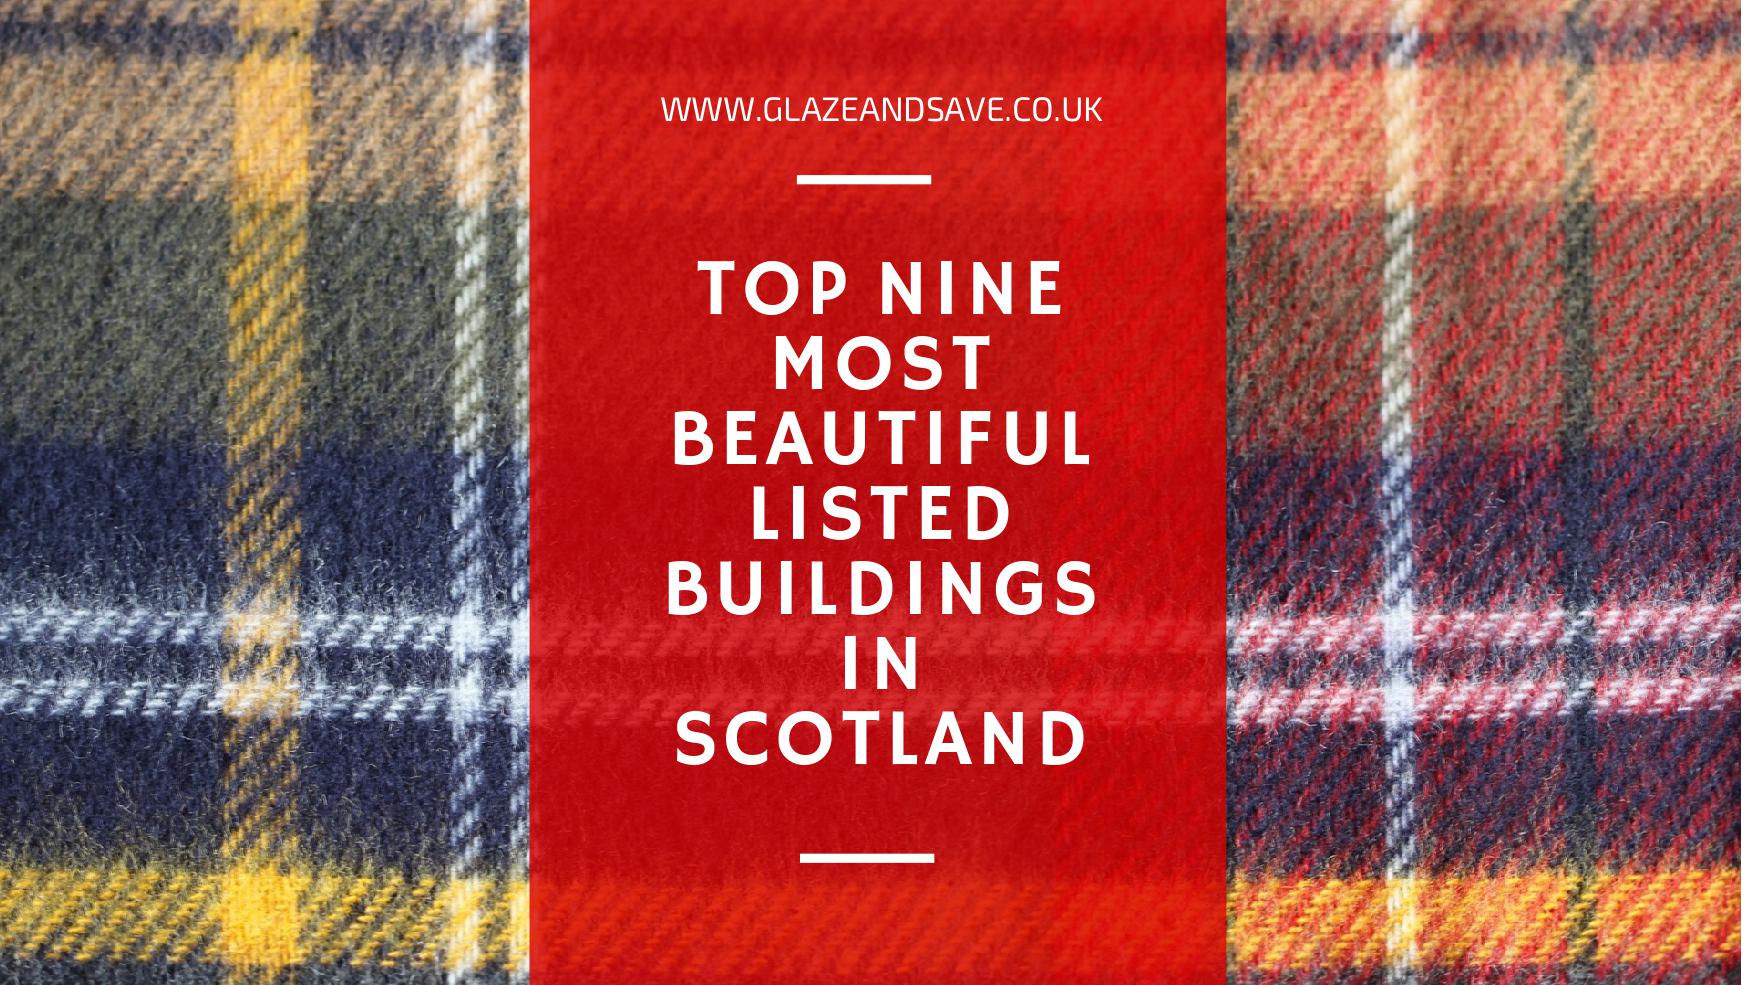 Top nine most beautiful listed buildings in Scotland by Glaze & Save bespoke magnetic secondary glazing and draught proofing experts